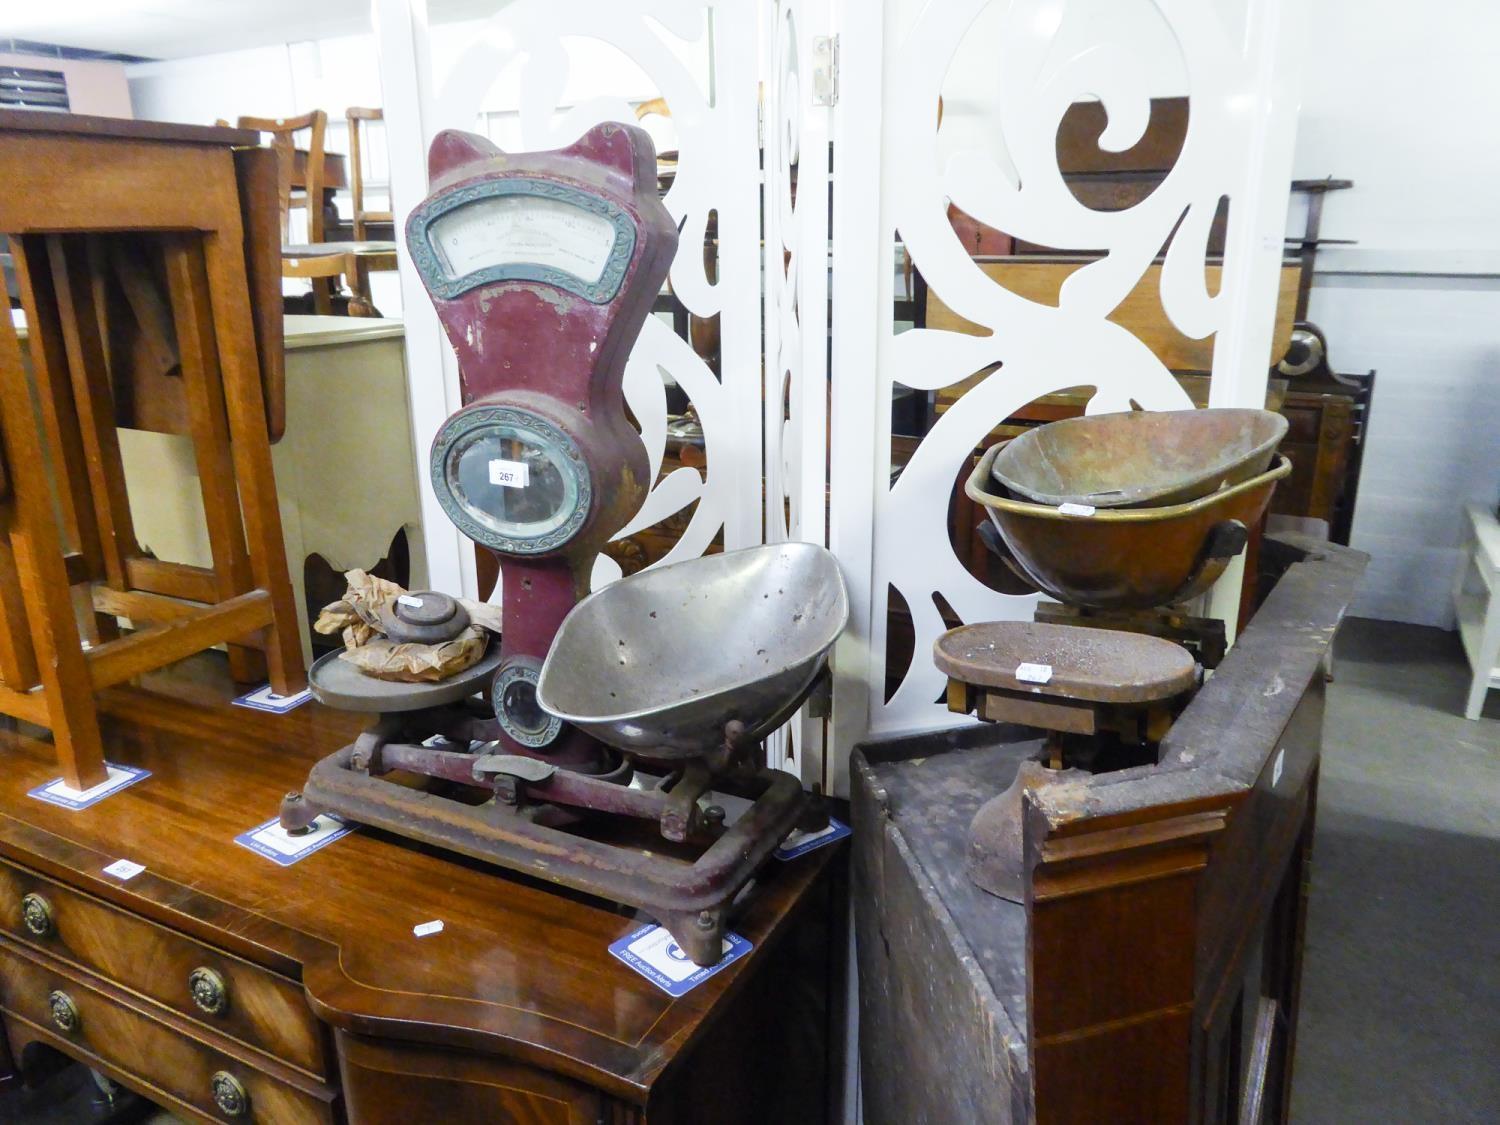 A LARGE SHOP SCALE AND A KITCHEN BALANCE SCALE WITH PANS AND WEIGHTS